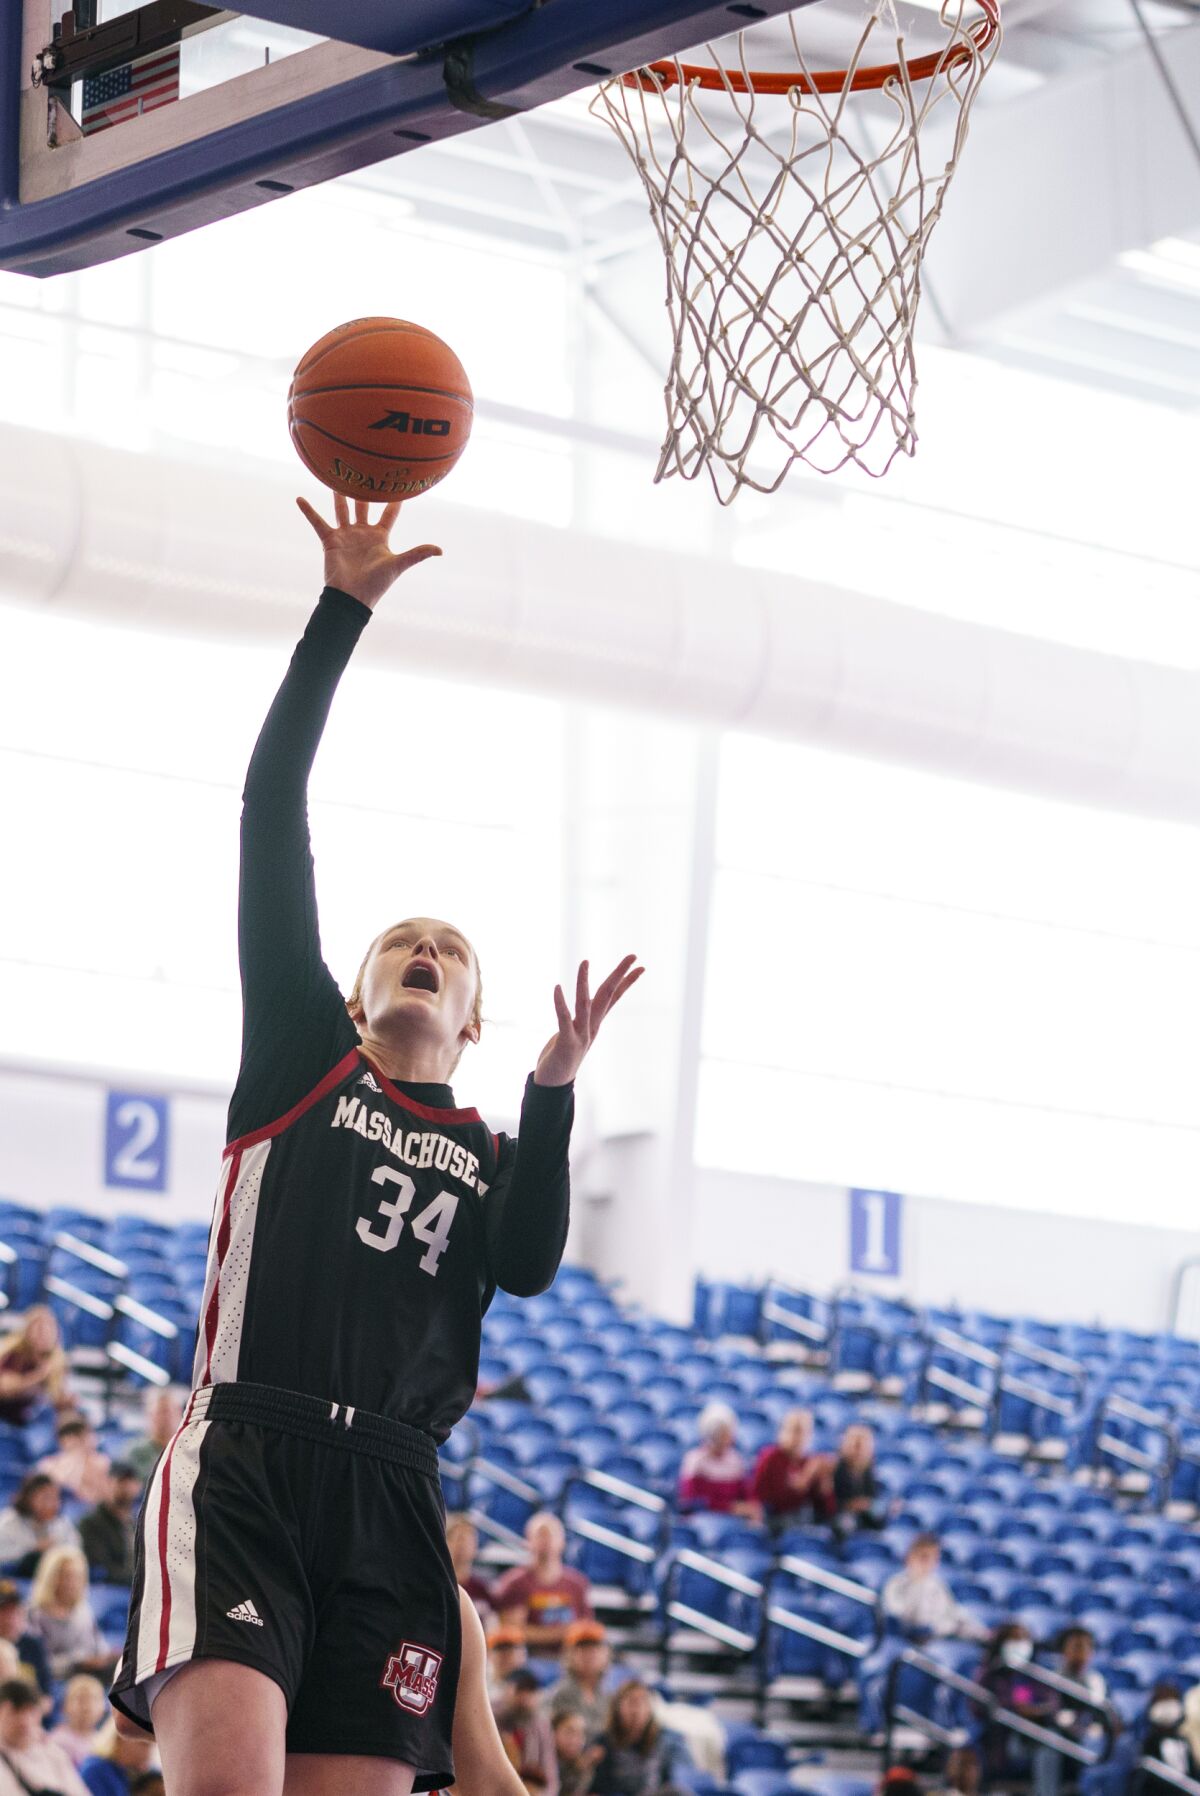 Massachusetts' Sam Breen shoots the ball during the first half of an NCAA college basketball championship game against Dayton in the A10 Conference Tournament, Sunday, March 6, 2022, in Wilmington, Del. (AP Photo/Chris Szagola)